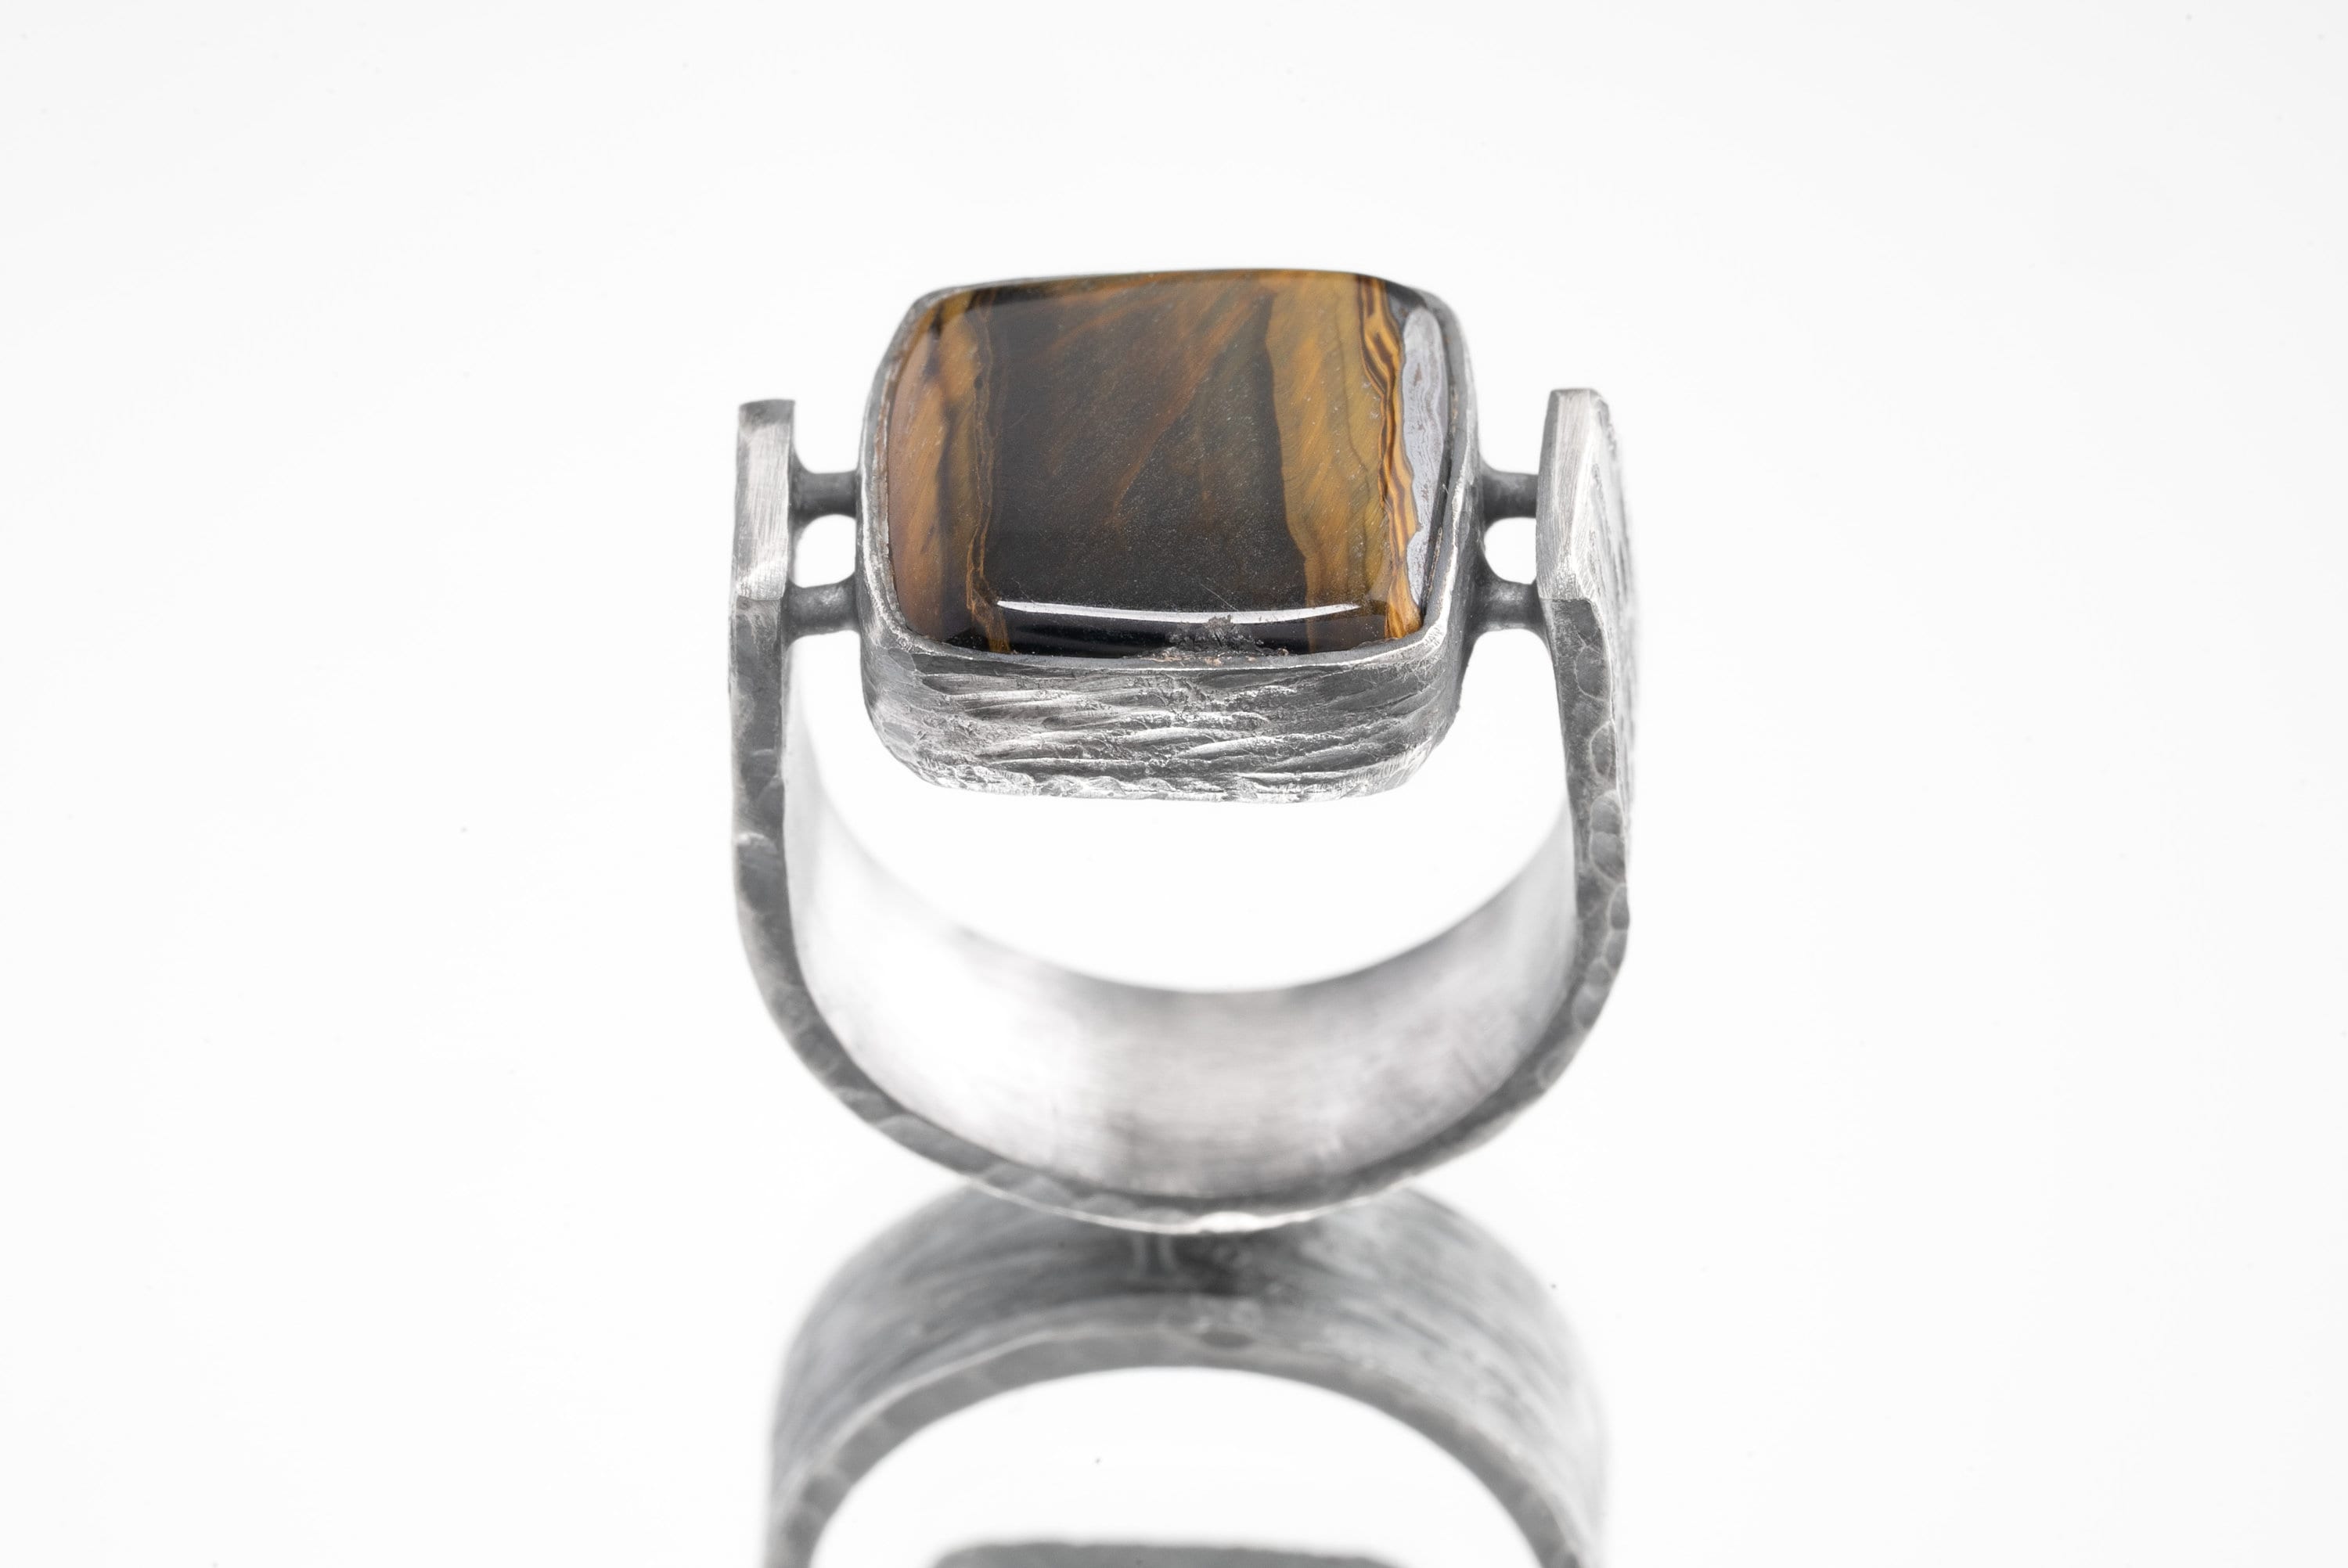 Large AAA Sugilite Cabochon - Rustic Comfortable Crystal Ring - Size 8 1/2 US - 925 Sterling Silver - Hammer Textured & Oxidised